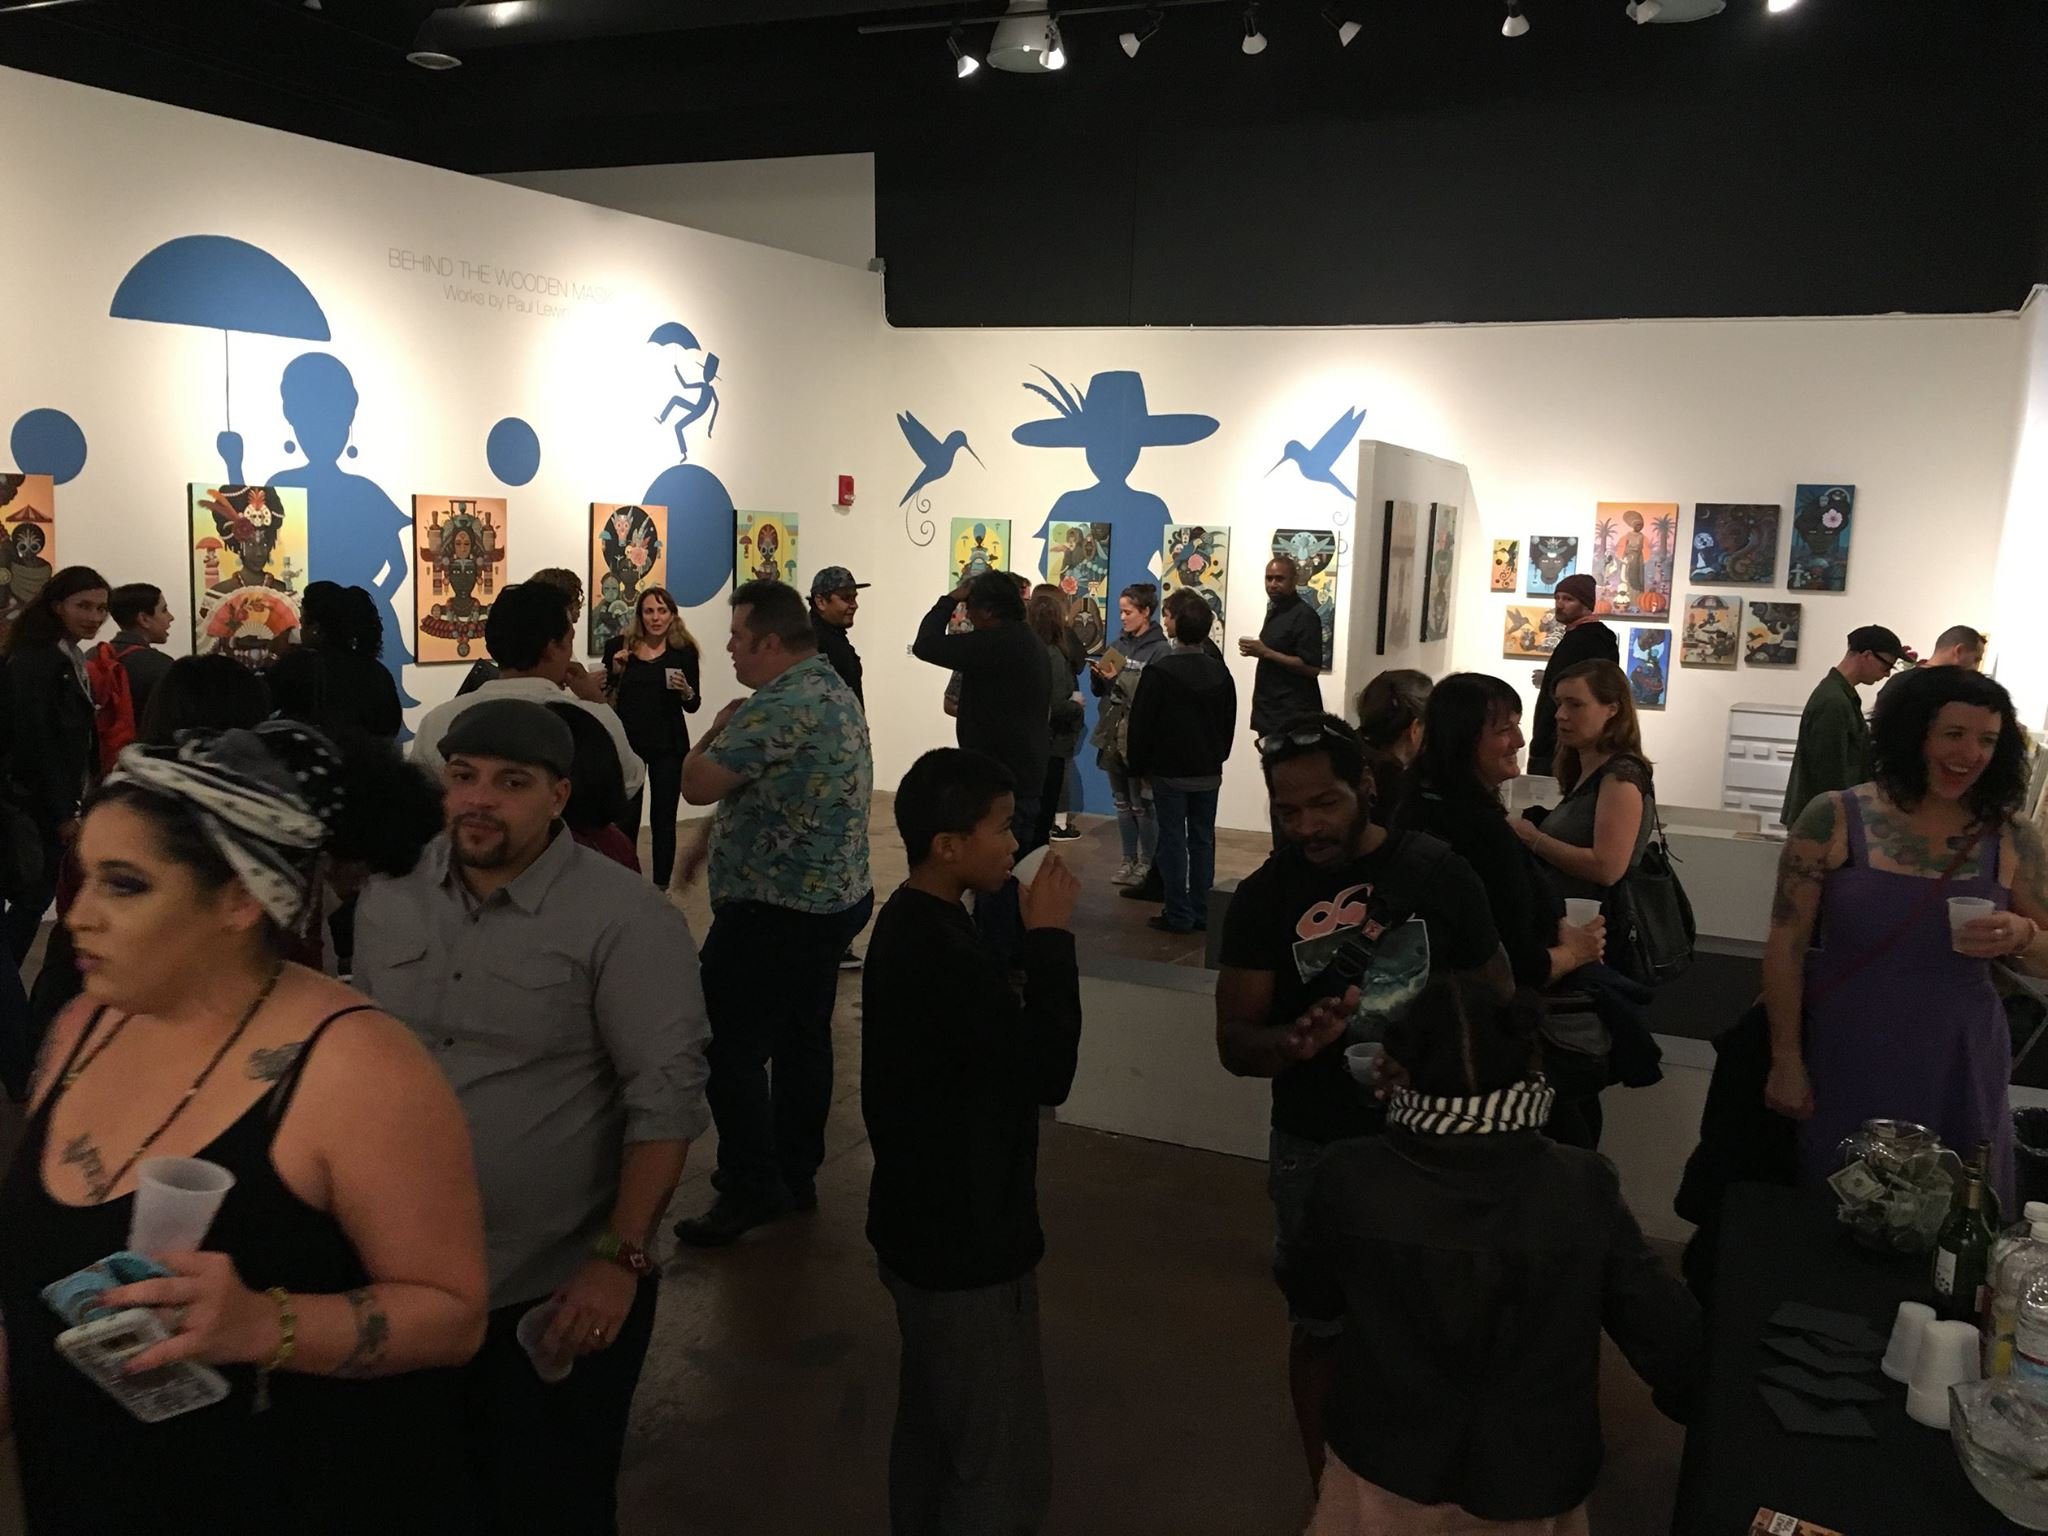  Full crowd filling a room in an art gallery 